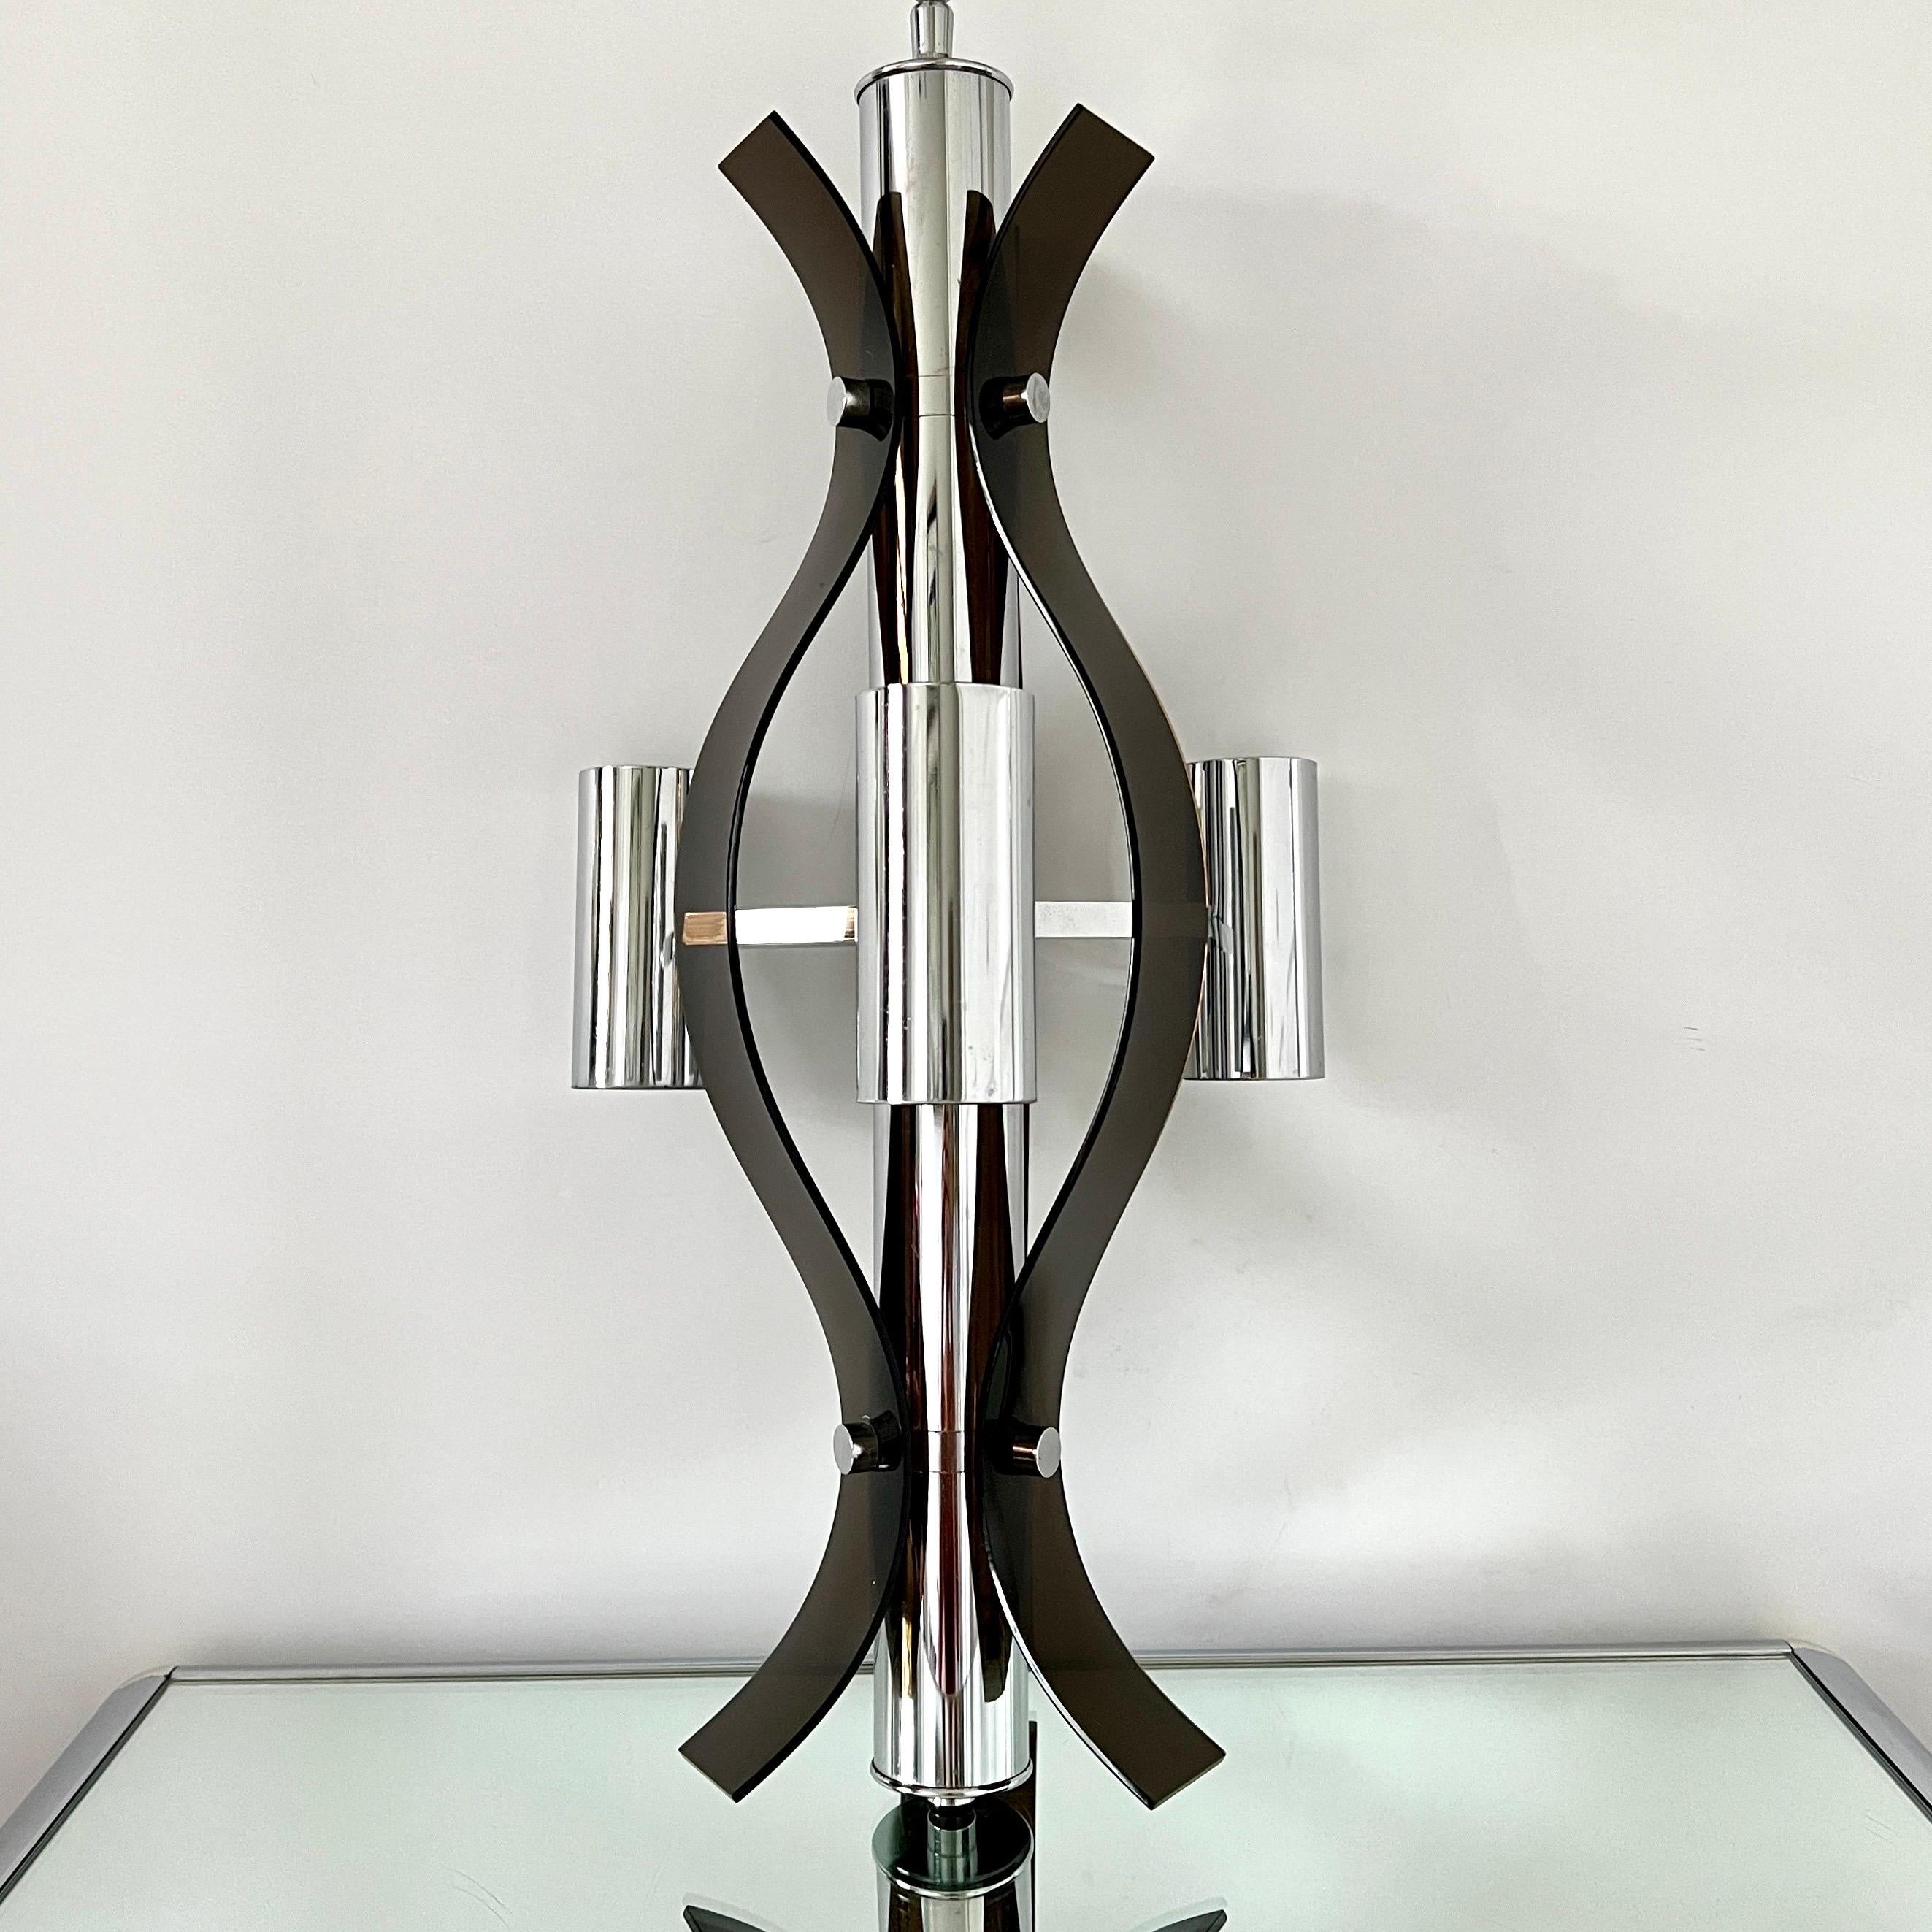 Sculptural Chandelier in Chrome and Smoked Lucite, Robert Sonneman, c. 1970's For Sale 7